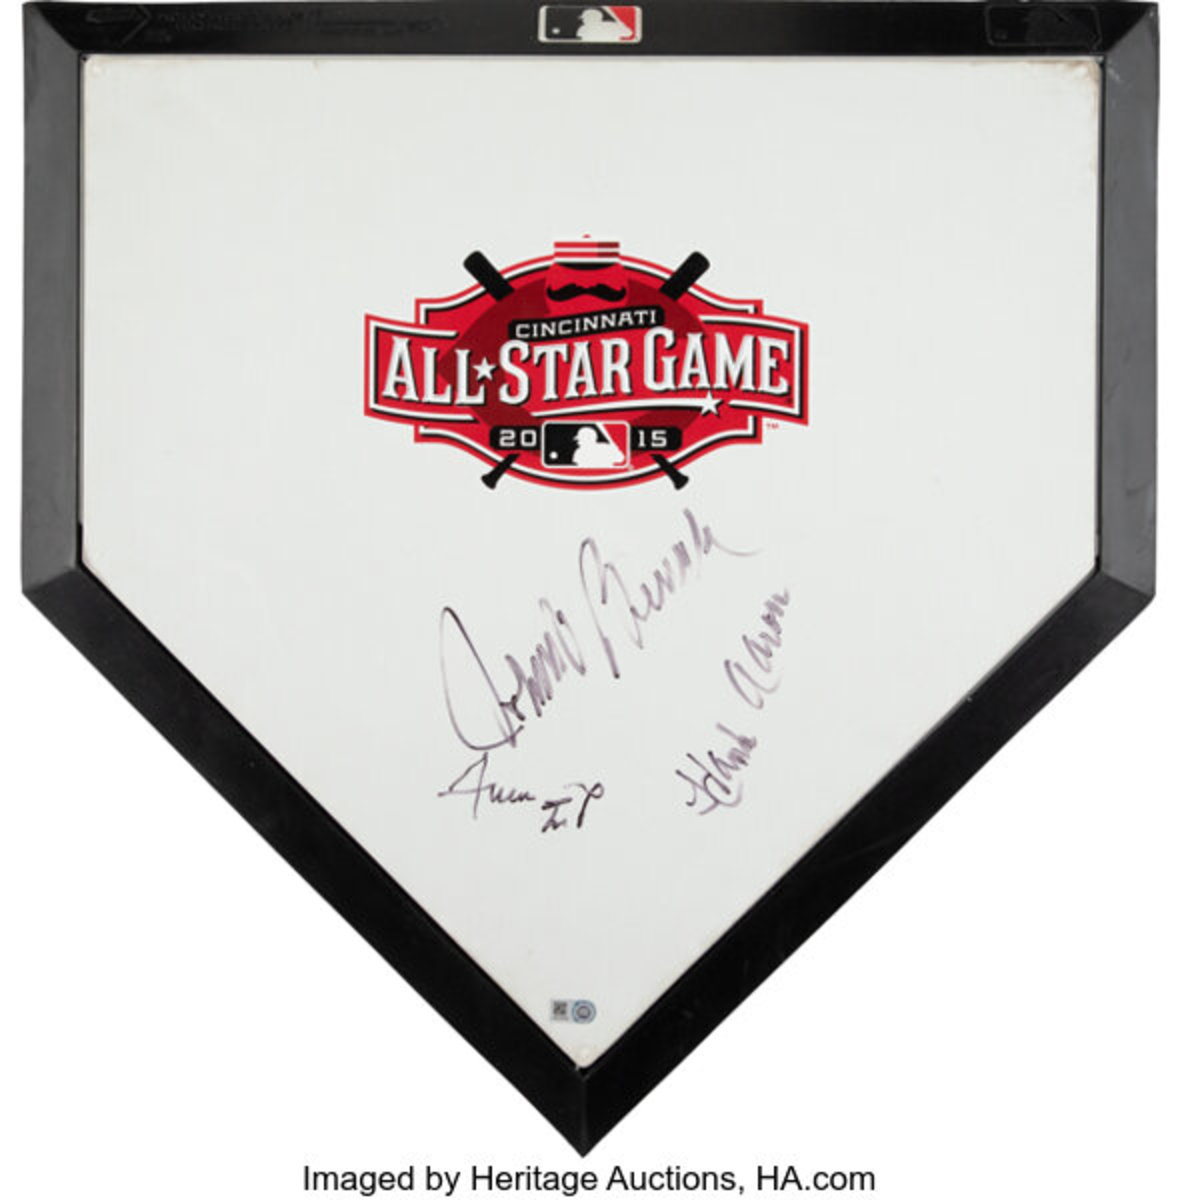 Home plate from 2015 MLB All-Star Game signed by Hank Aaron, Willie Mays and Johnny Bench.